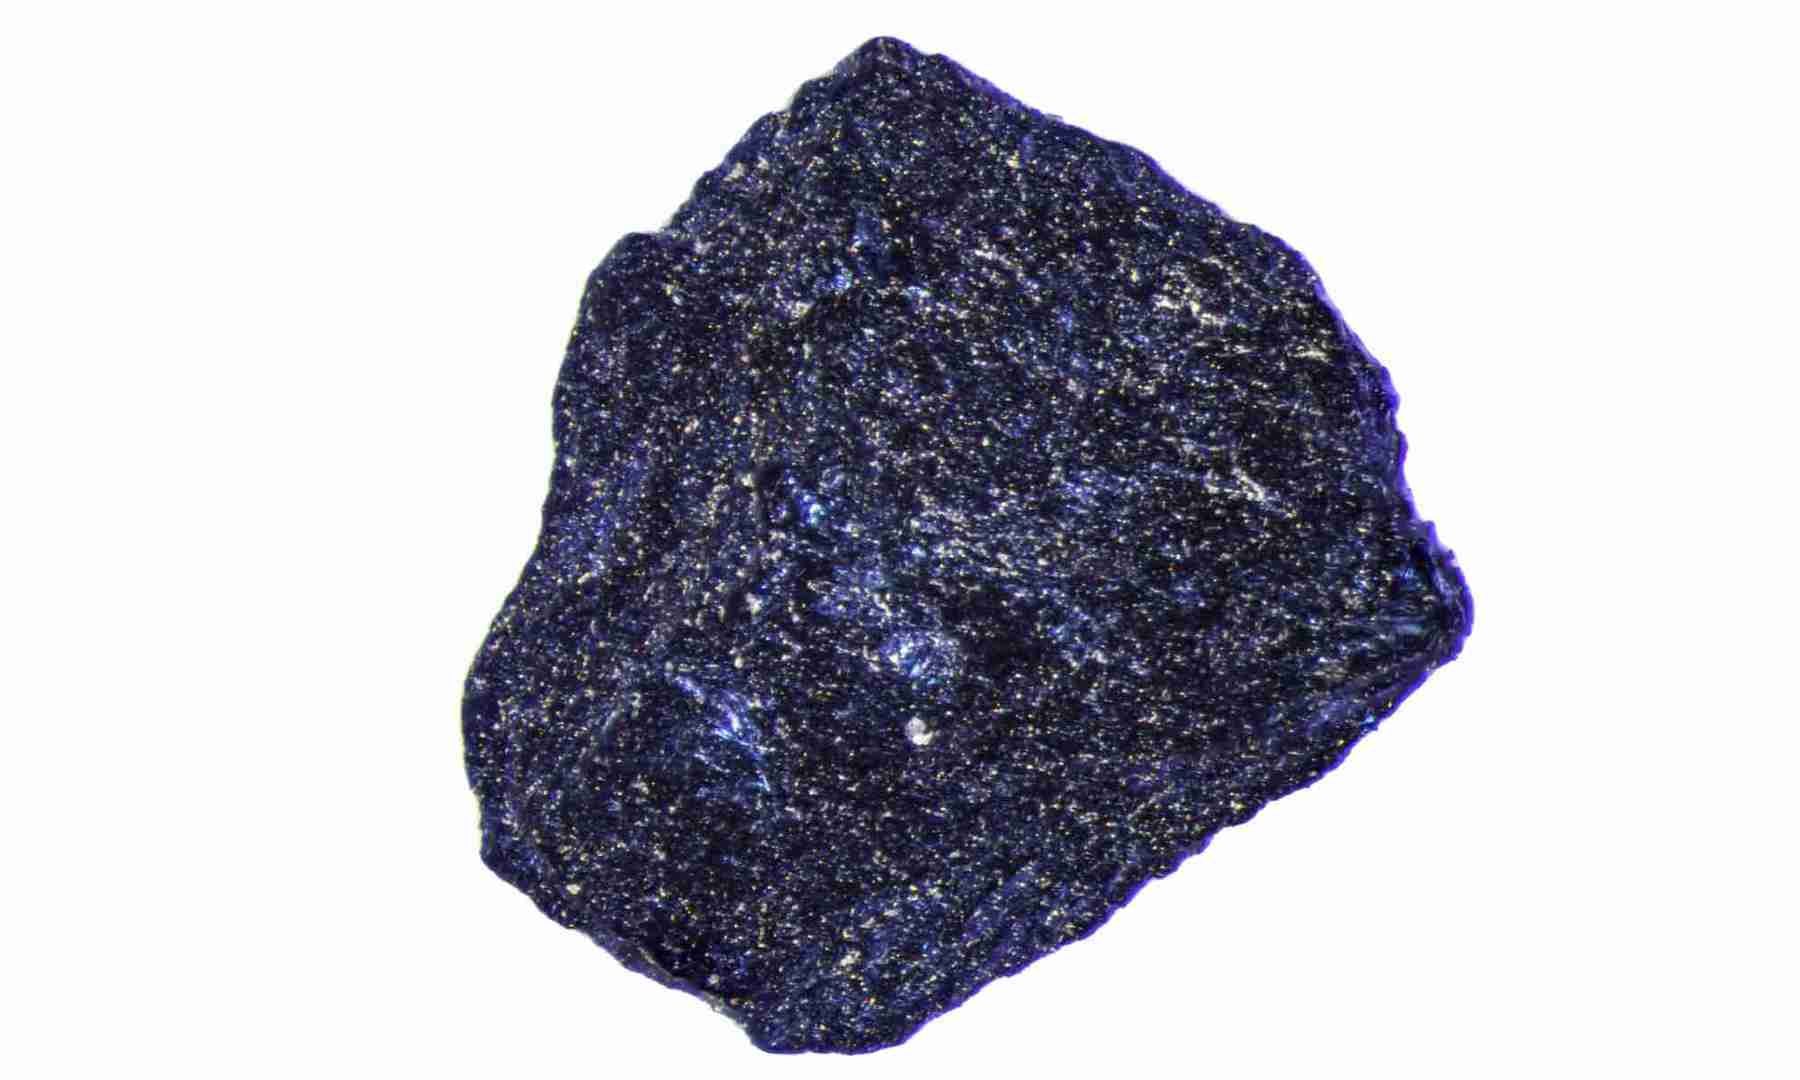 a blue mineral with a rough texture but shimmery in appearance